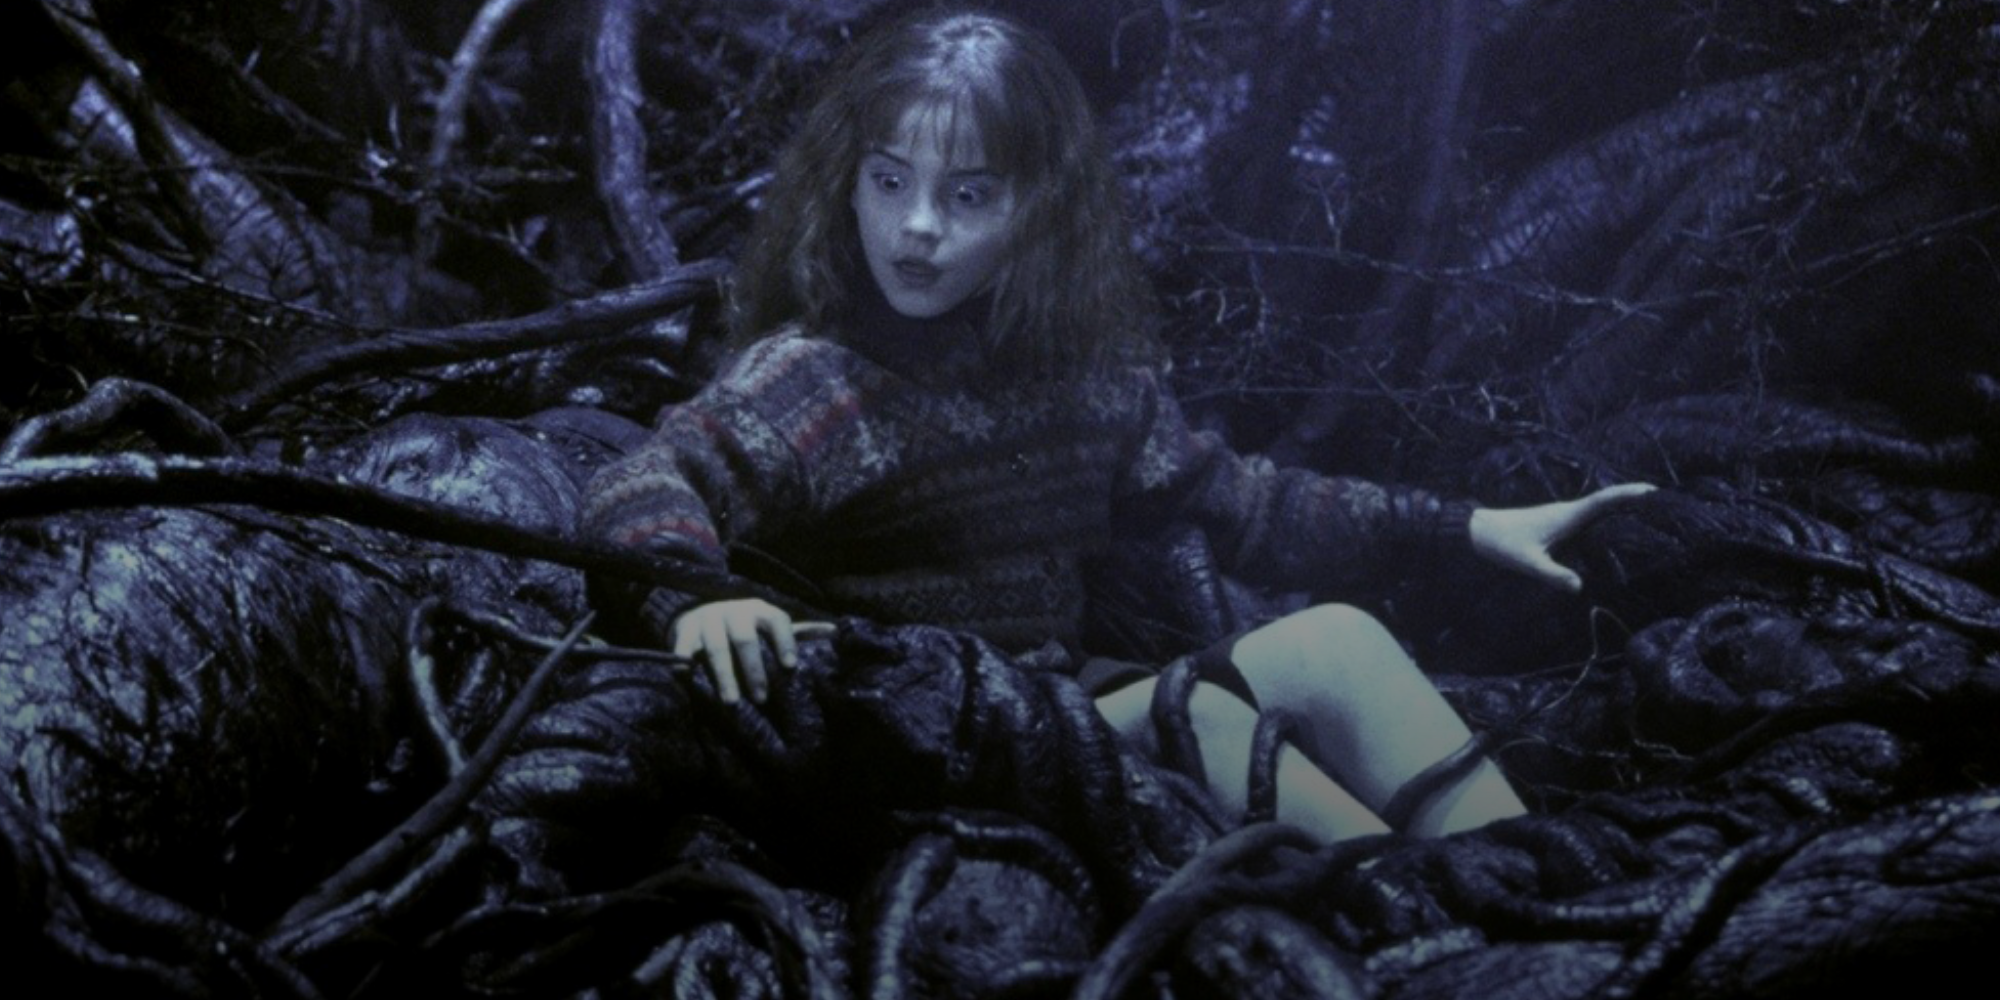 Hermione caught in Devil's Snare